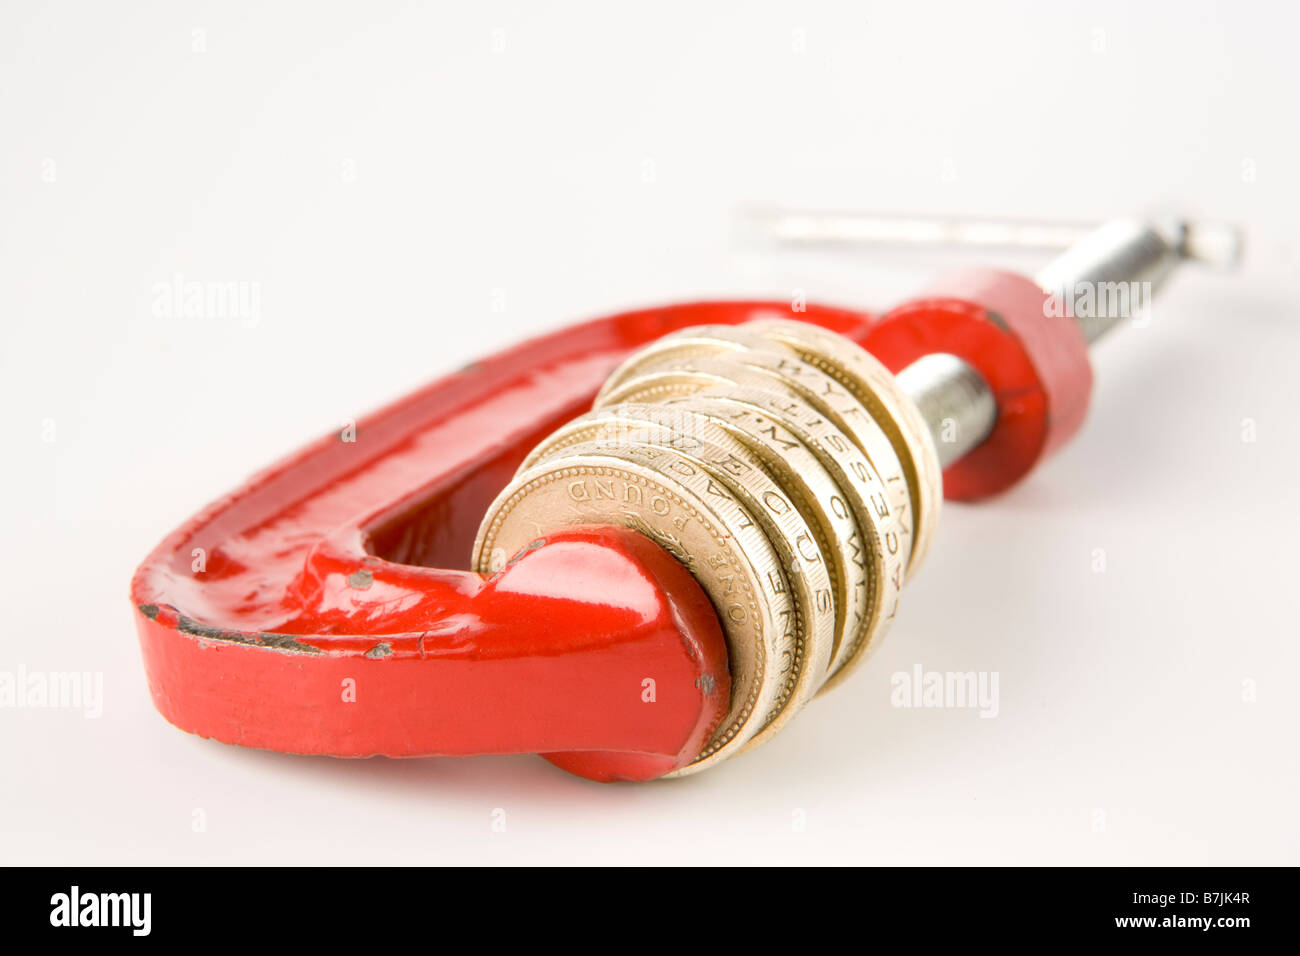 Stack Of Pound Coins In Red Clamp On White Background Stock Photo